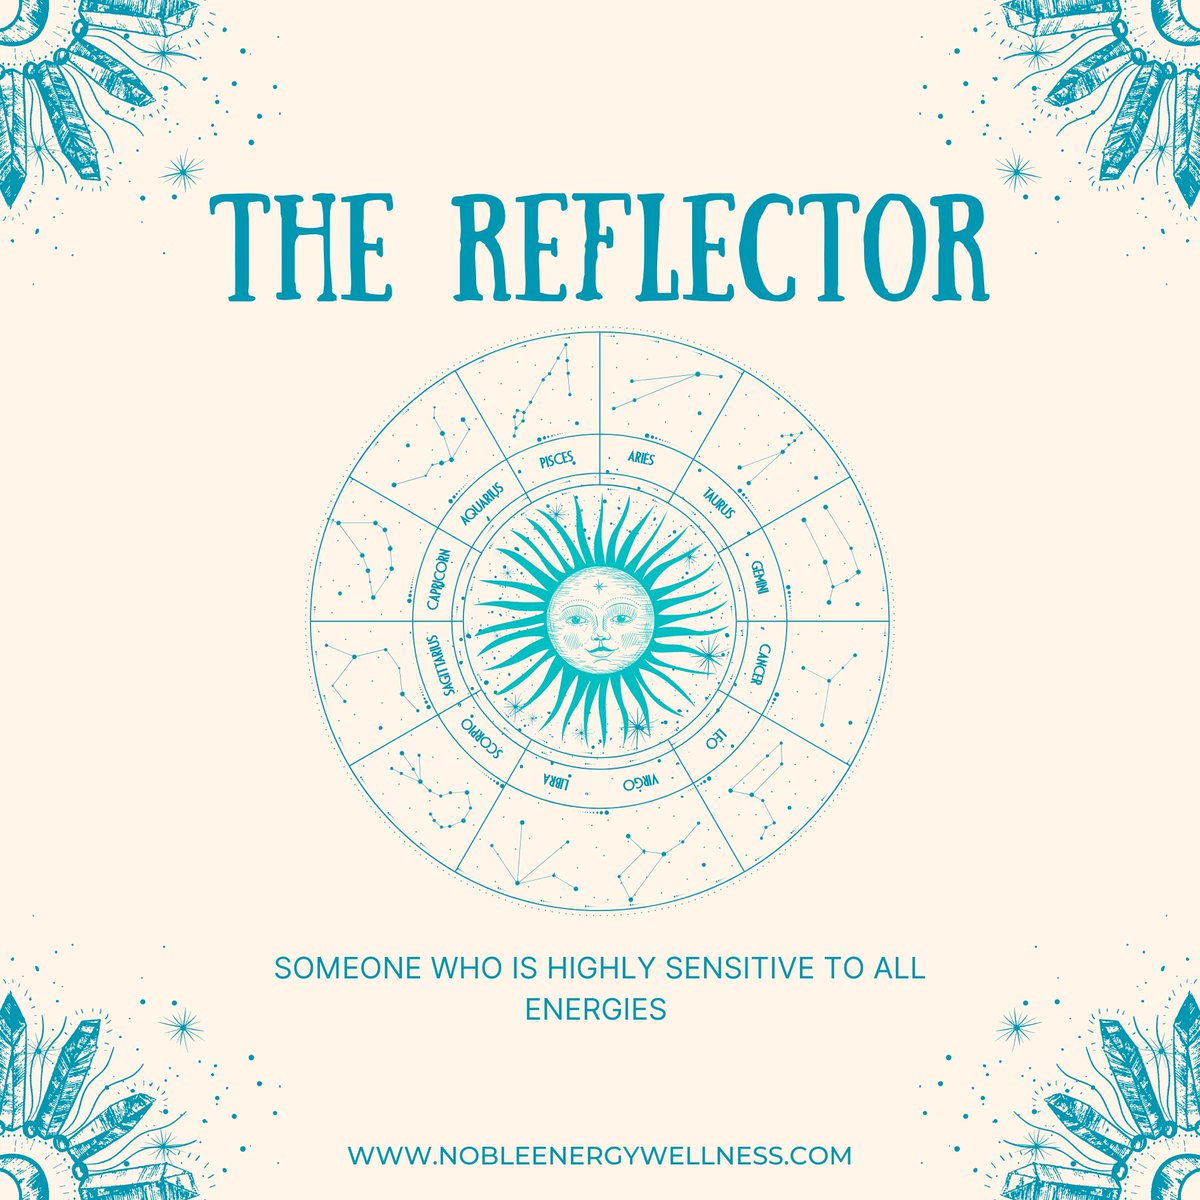 Introducing The Reflector. 🌌✨

Highly receptive and sensitive to energies, Reflectors reflect their true nature. Embrace open awareness, unlock possibilities, and find empowerment.

Concluding The 5 Ways of Being. 

Learn more: nobleenergywellness.com/book-an-appoin…

#TheReflector